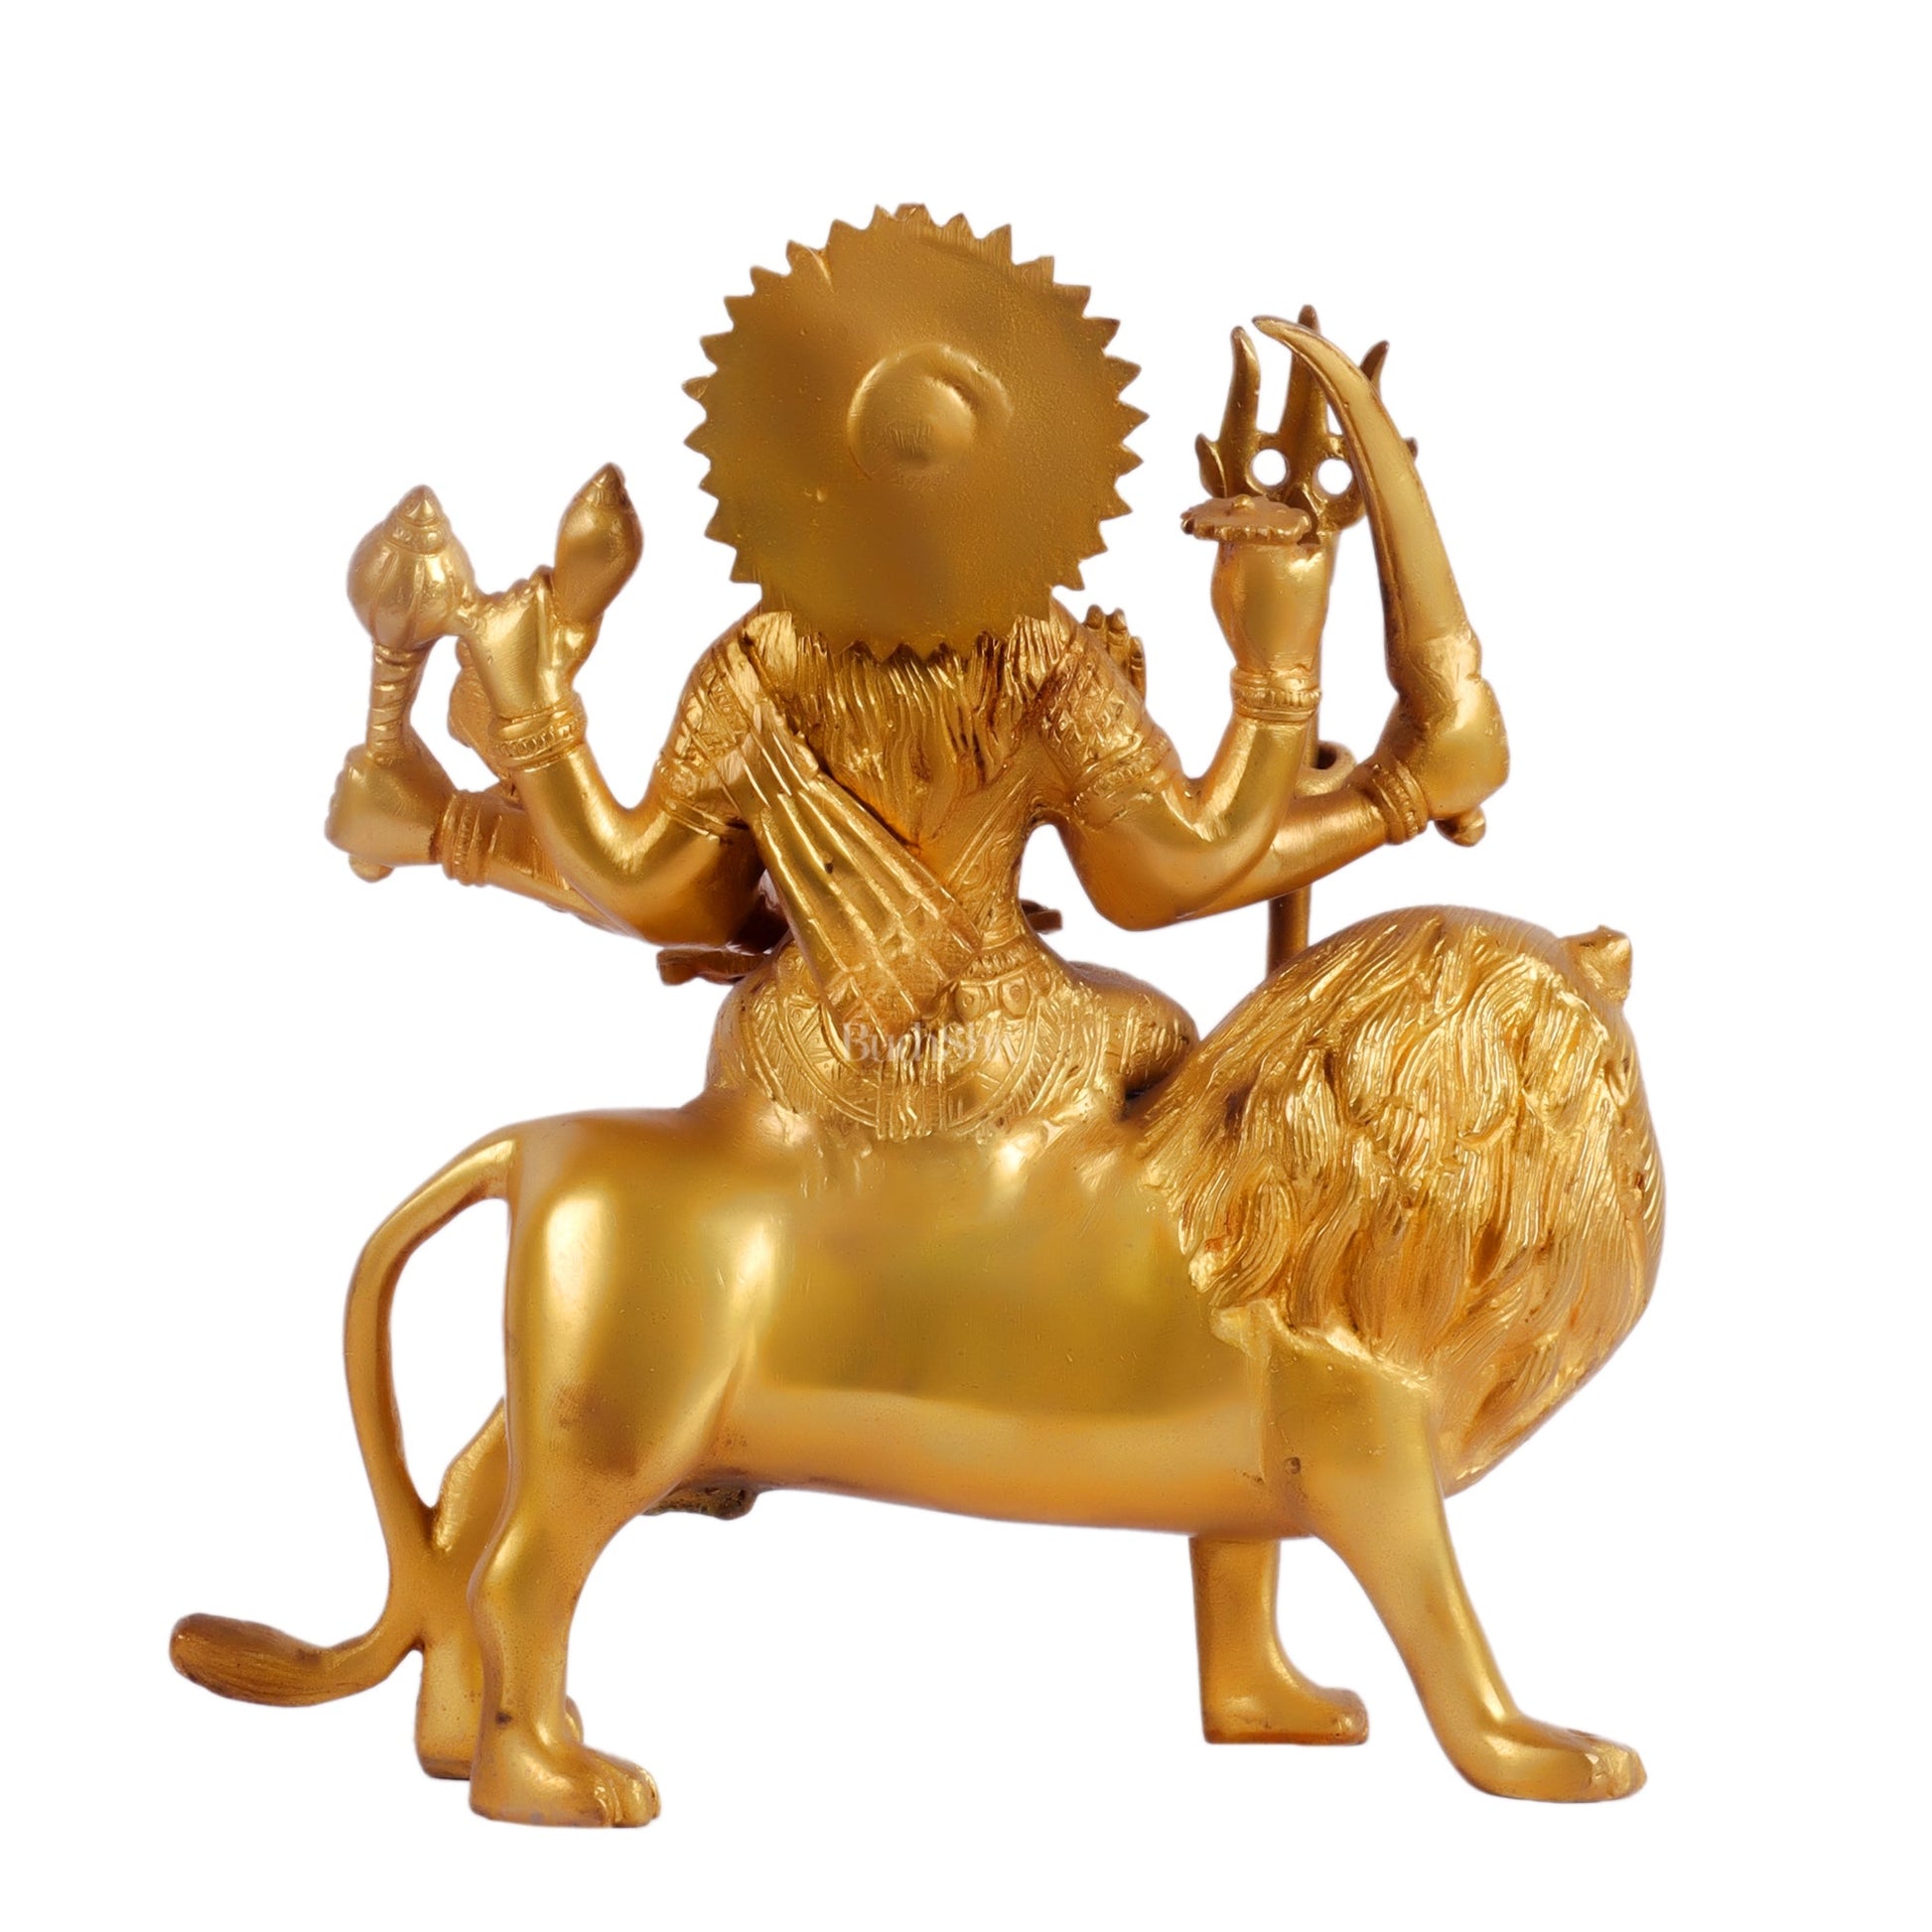 Goddess Durga brass idol with 8 arms sitting on lion with stonework 9 inches - Budhshiv.com